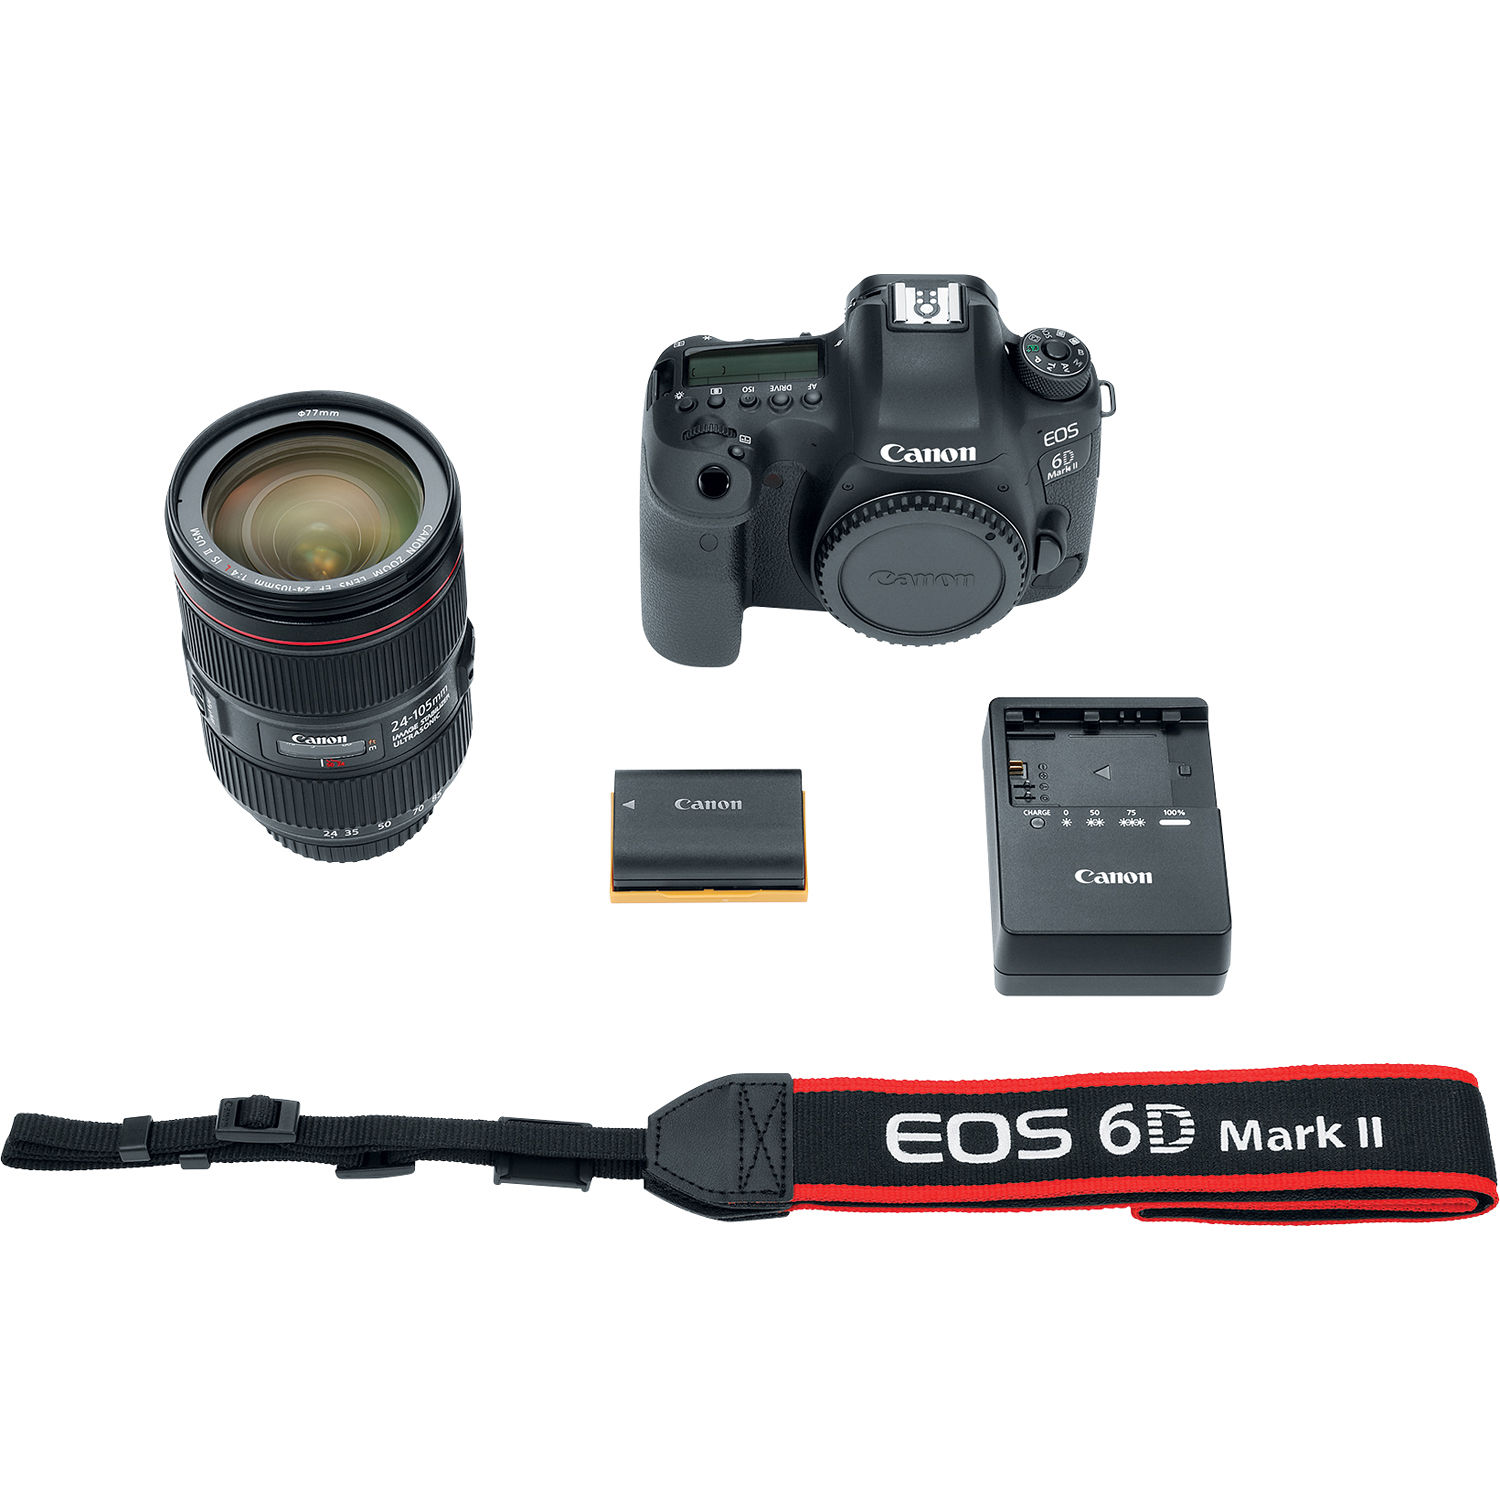 Canon EOS 6D Mark II DSLR Camera with 24-105mm f/4L II Lens - image 4 of 4